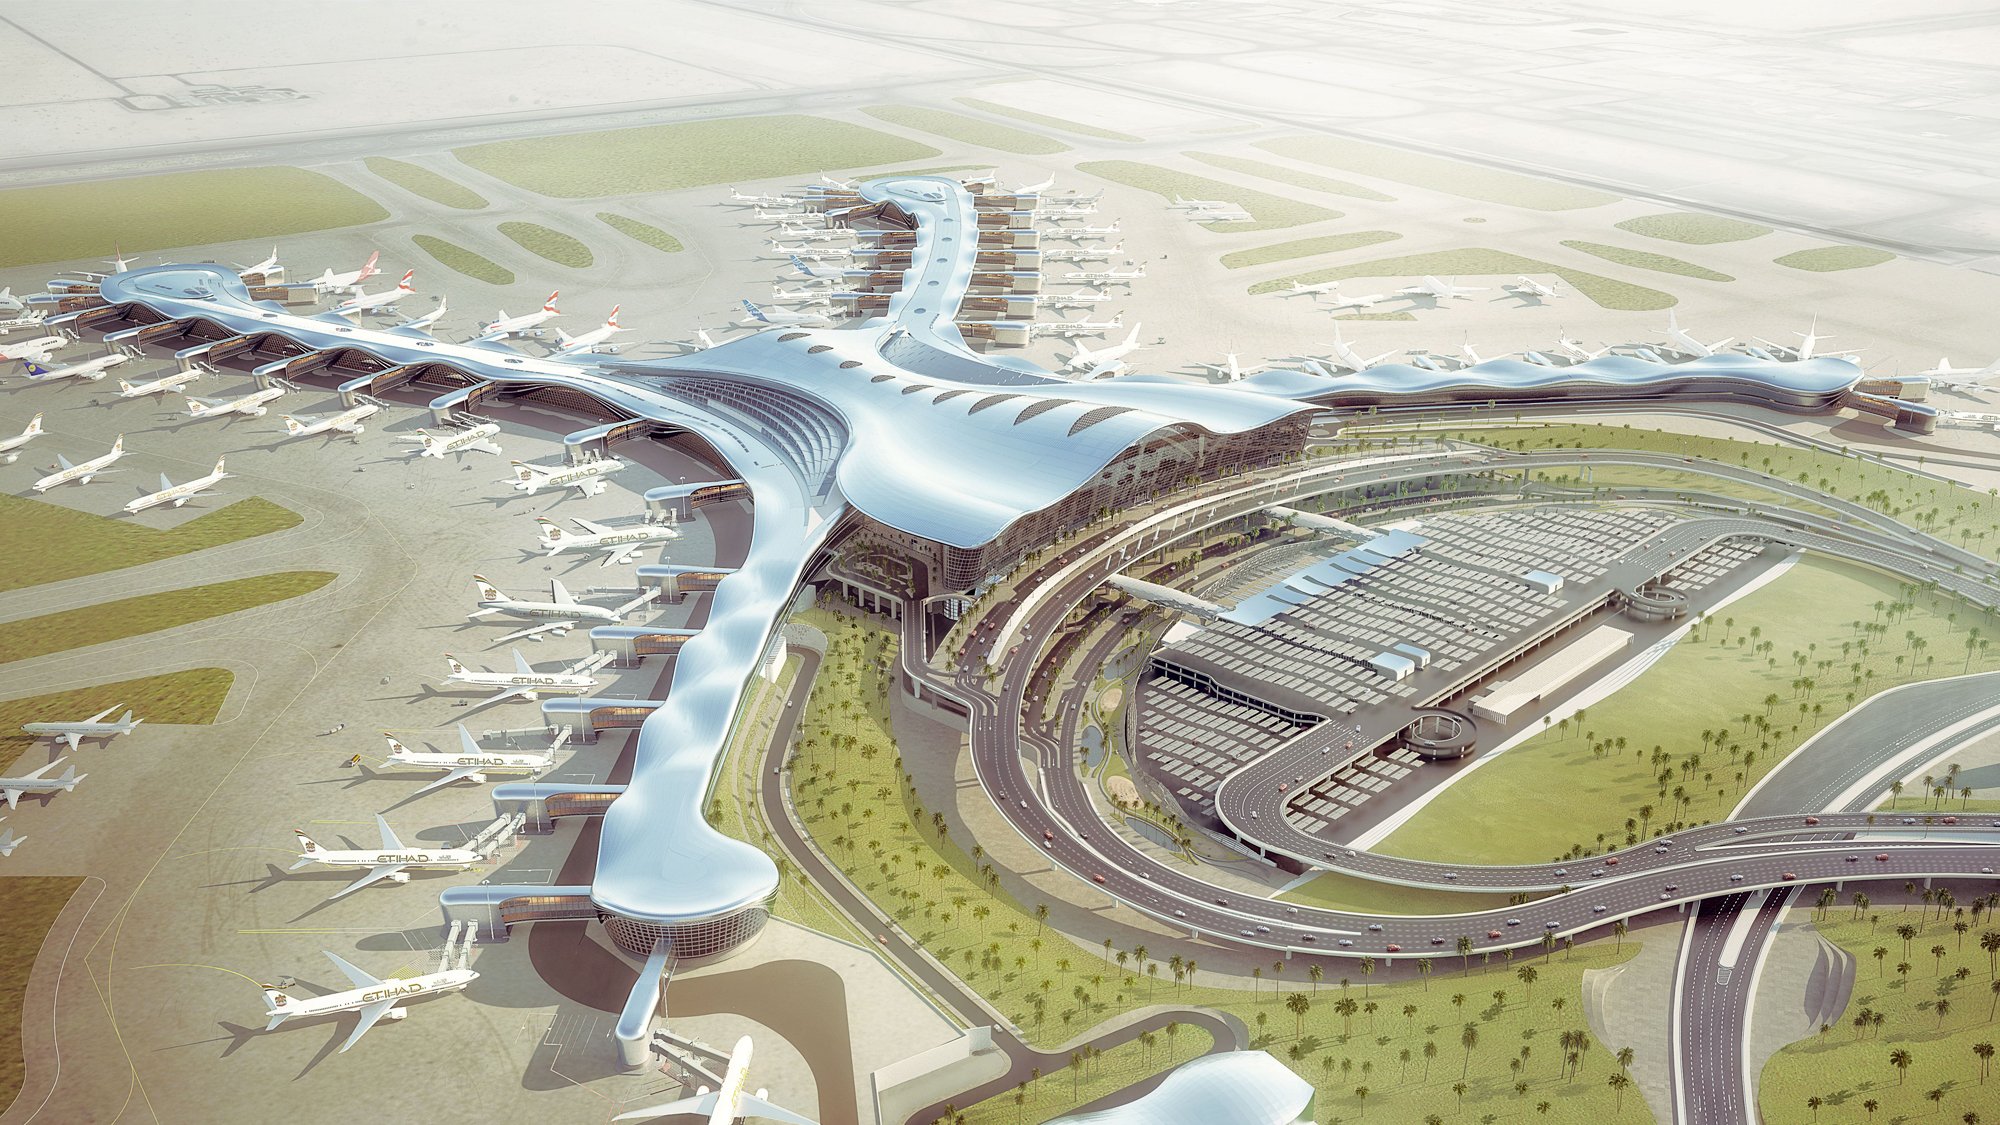 Render of the airport. Credit: Arup.